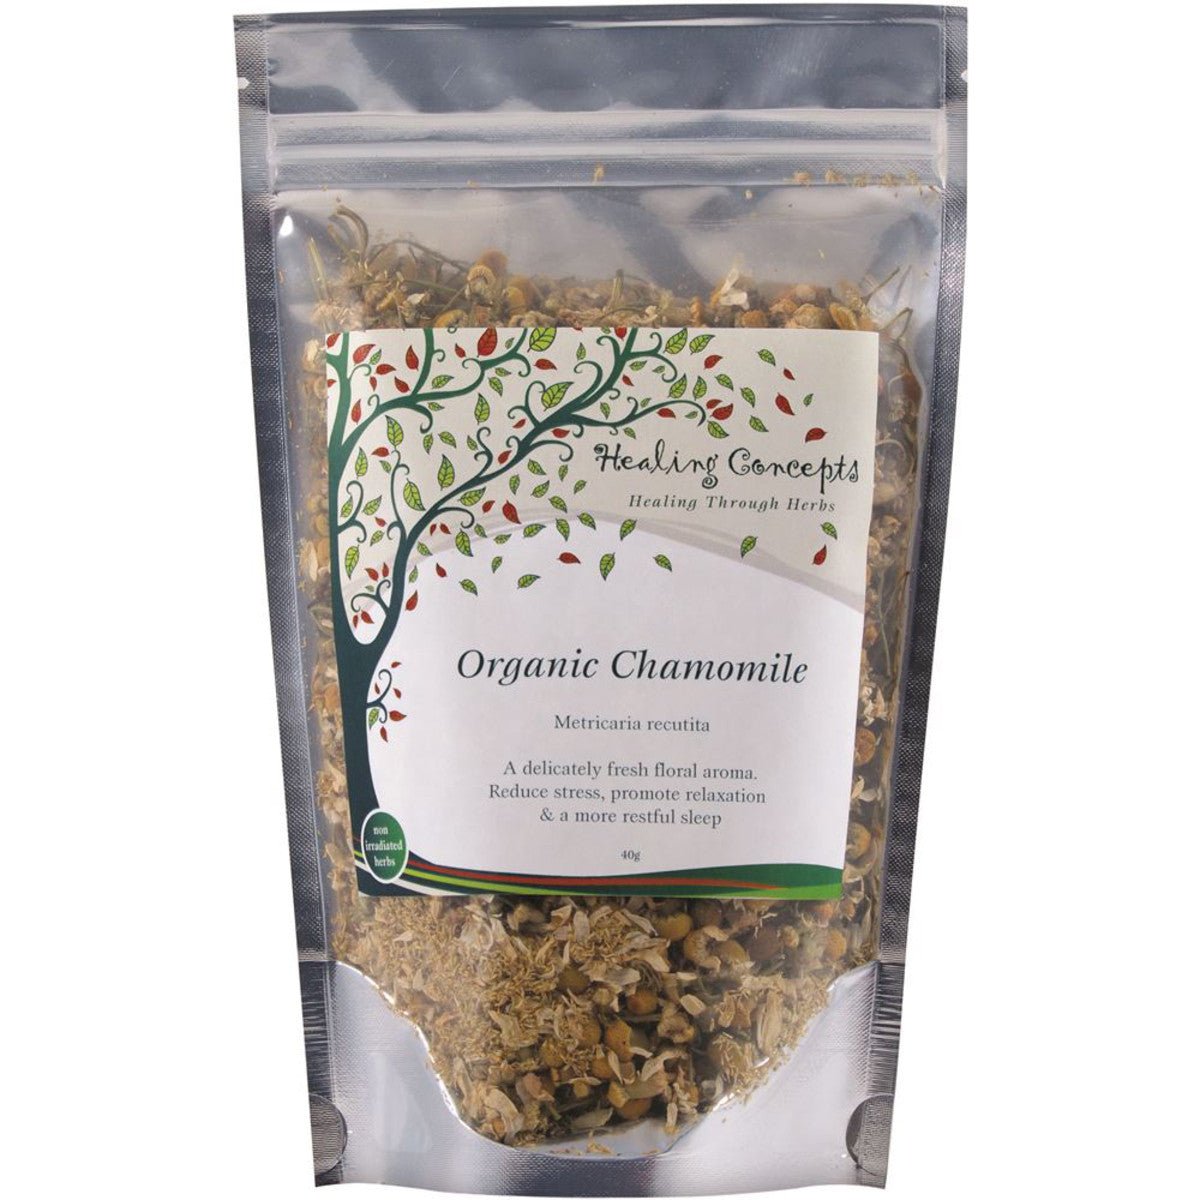 HEALING CONCEPTS Organic Chamomile 40g - Dr Earth - Drinks